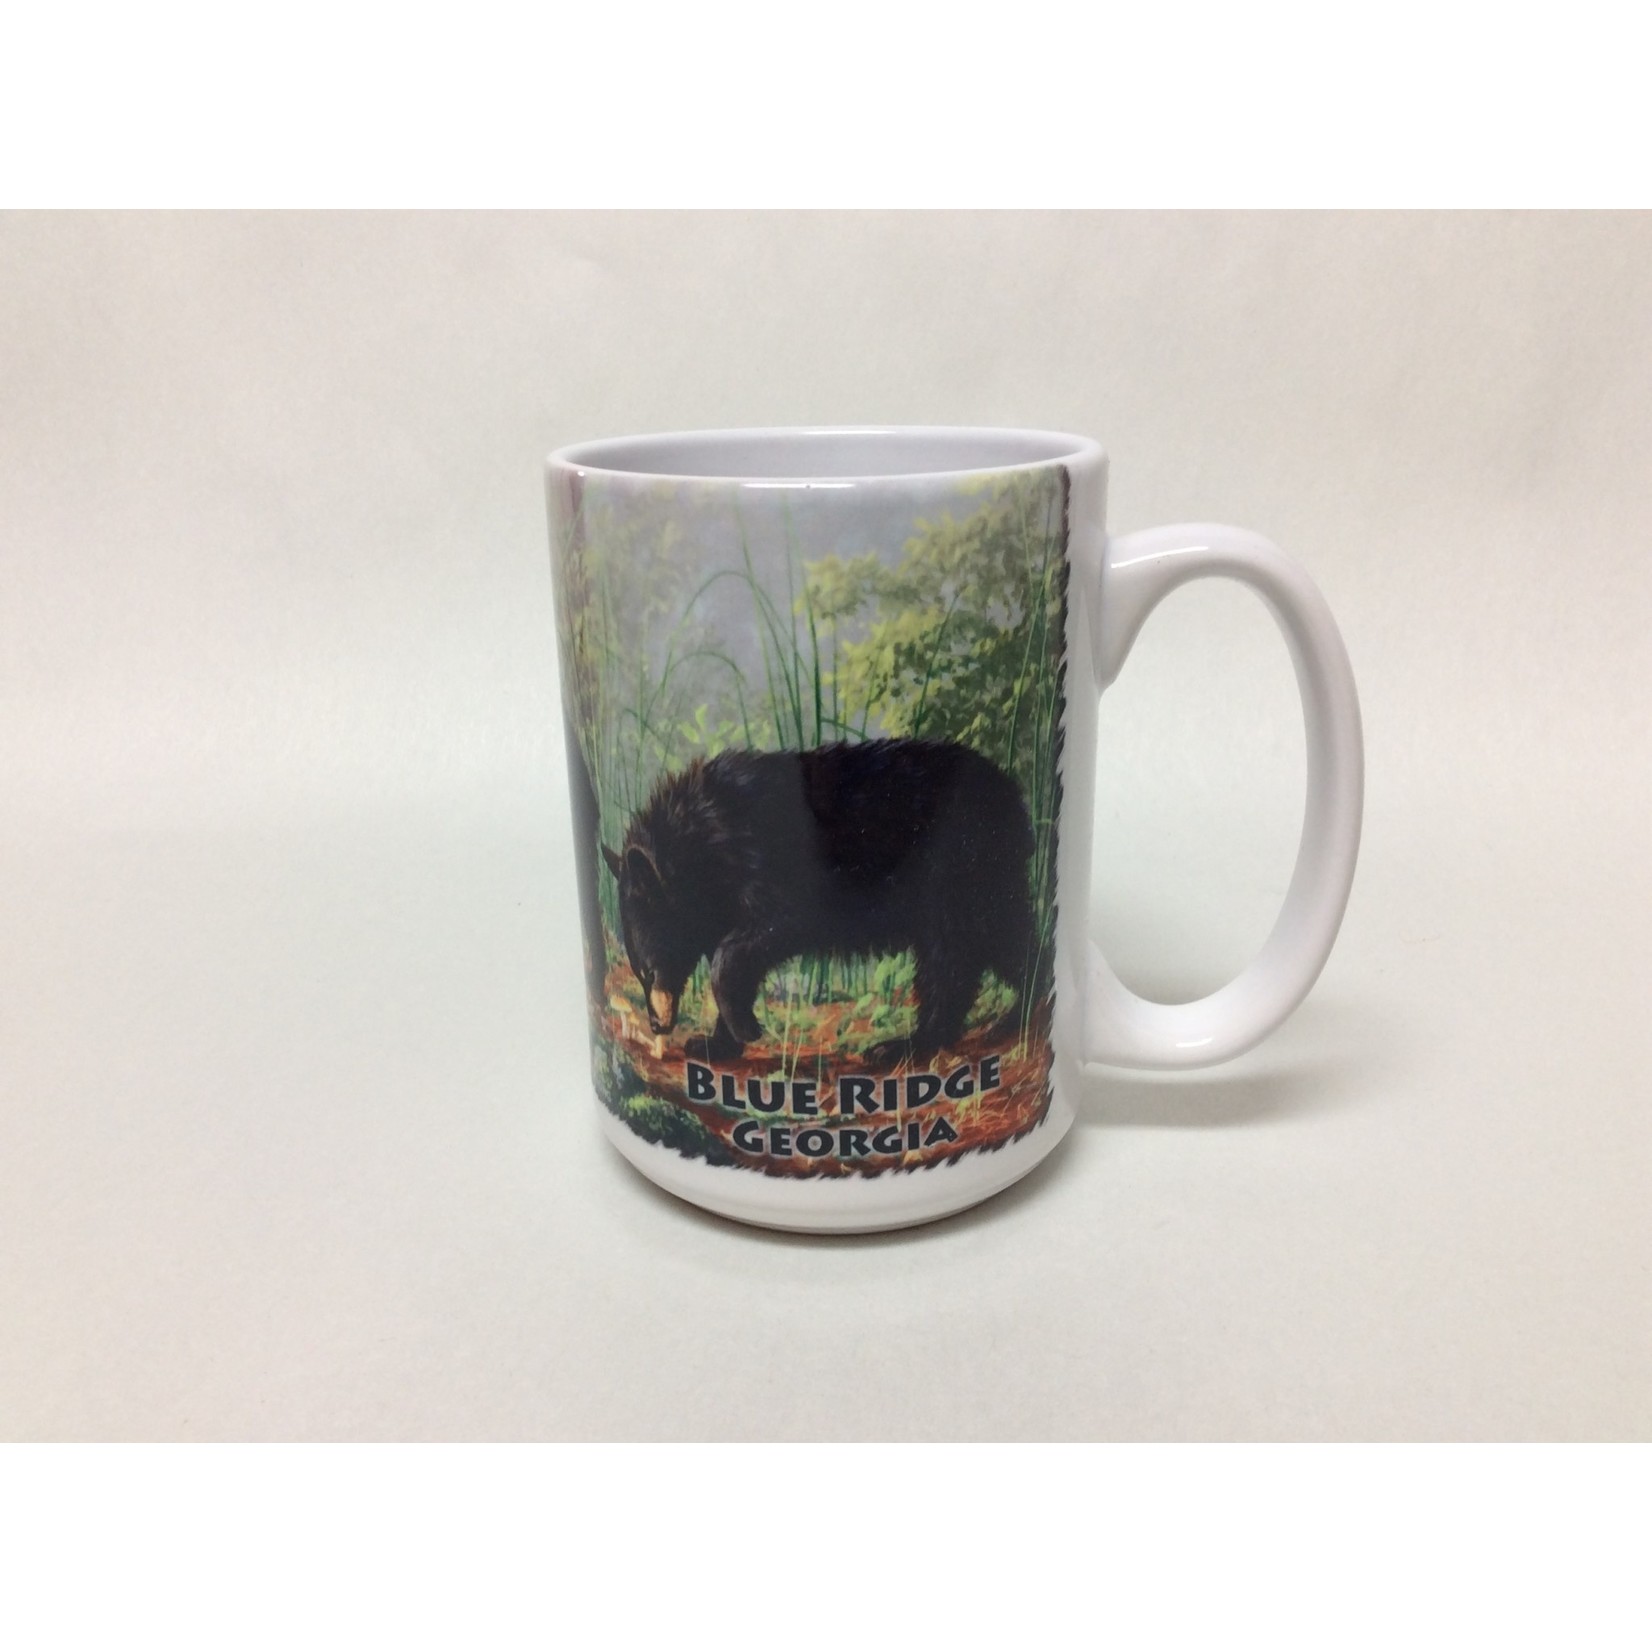 Looking for Trouble mug